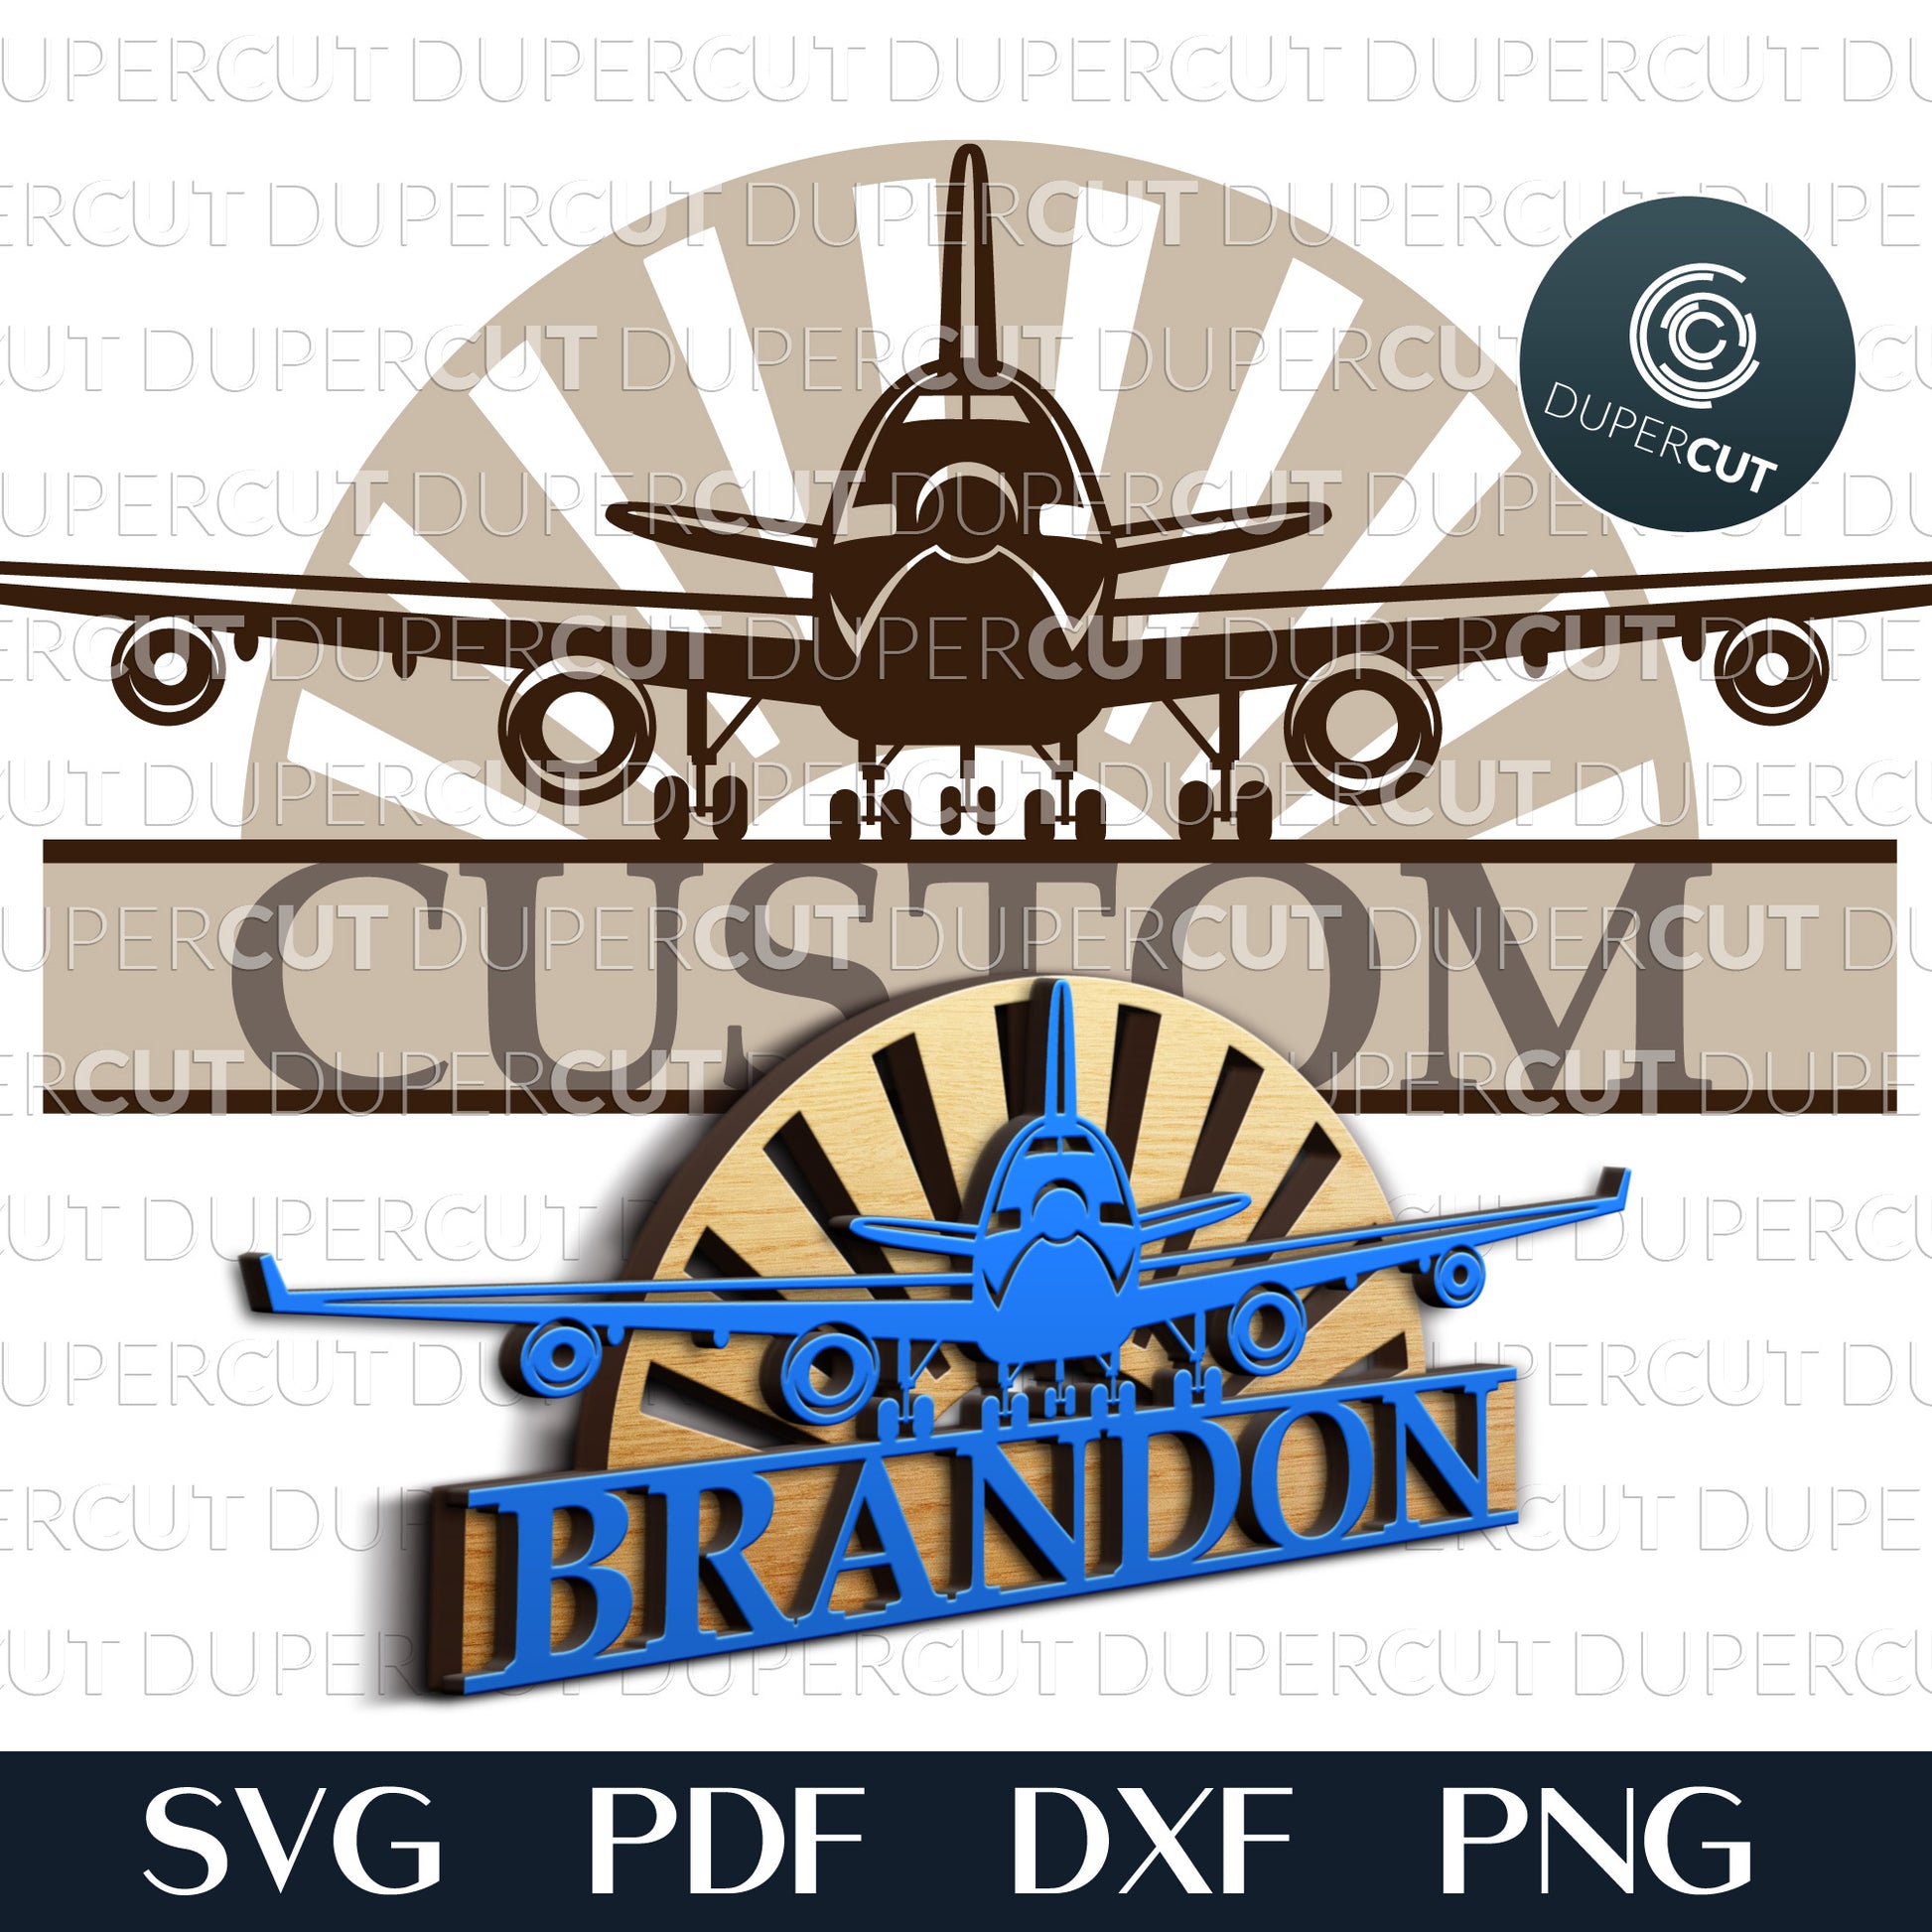 Airplane name sign - customized boys room decoration - SVG EPS DXF files for laser cutting with Glowforge, Cricut, Silhouette, CNC plasma machines by DuperCut